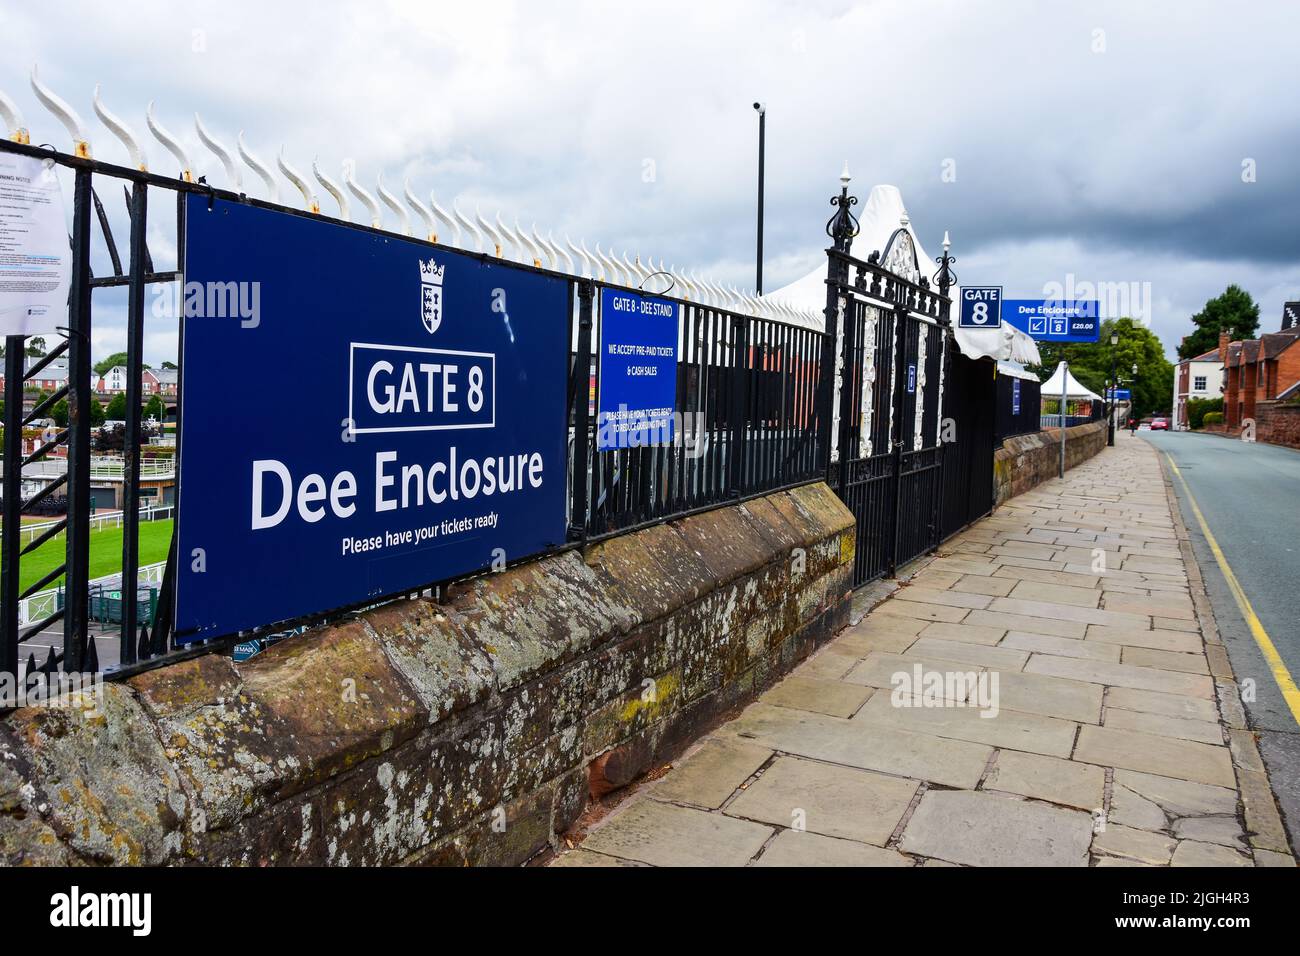 Chester, UK: Jul 3, 2022: A sign marks the entrance to the Dee Enclosure and Dee Stand at Chester Racecourse. This is an uncovered viewing area. Stock Photo